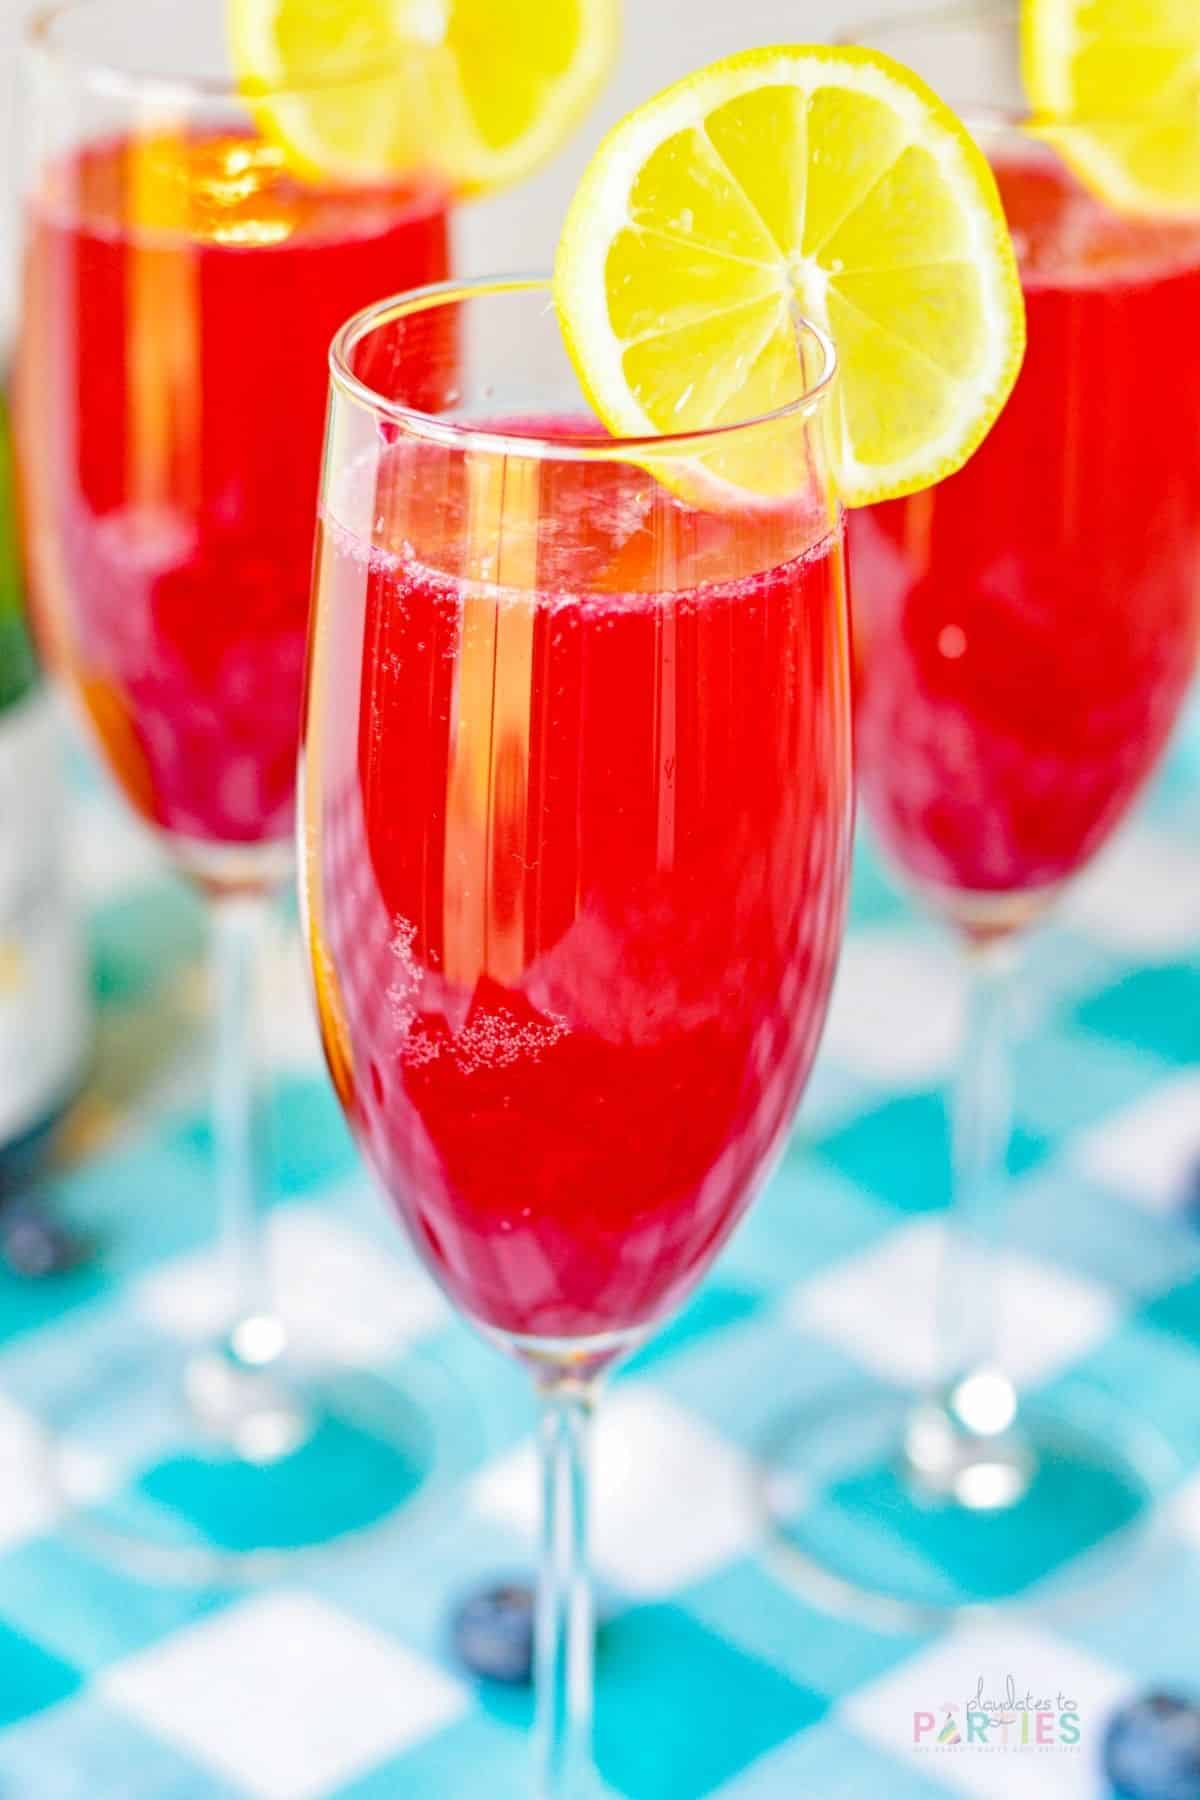 Bright red mimosa in a champagne flute garnished with lemon.